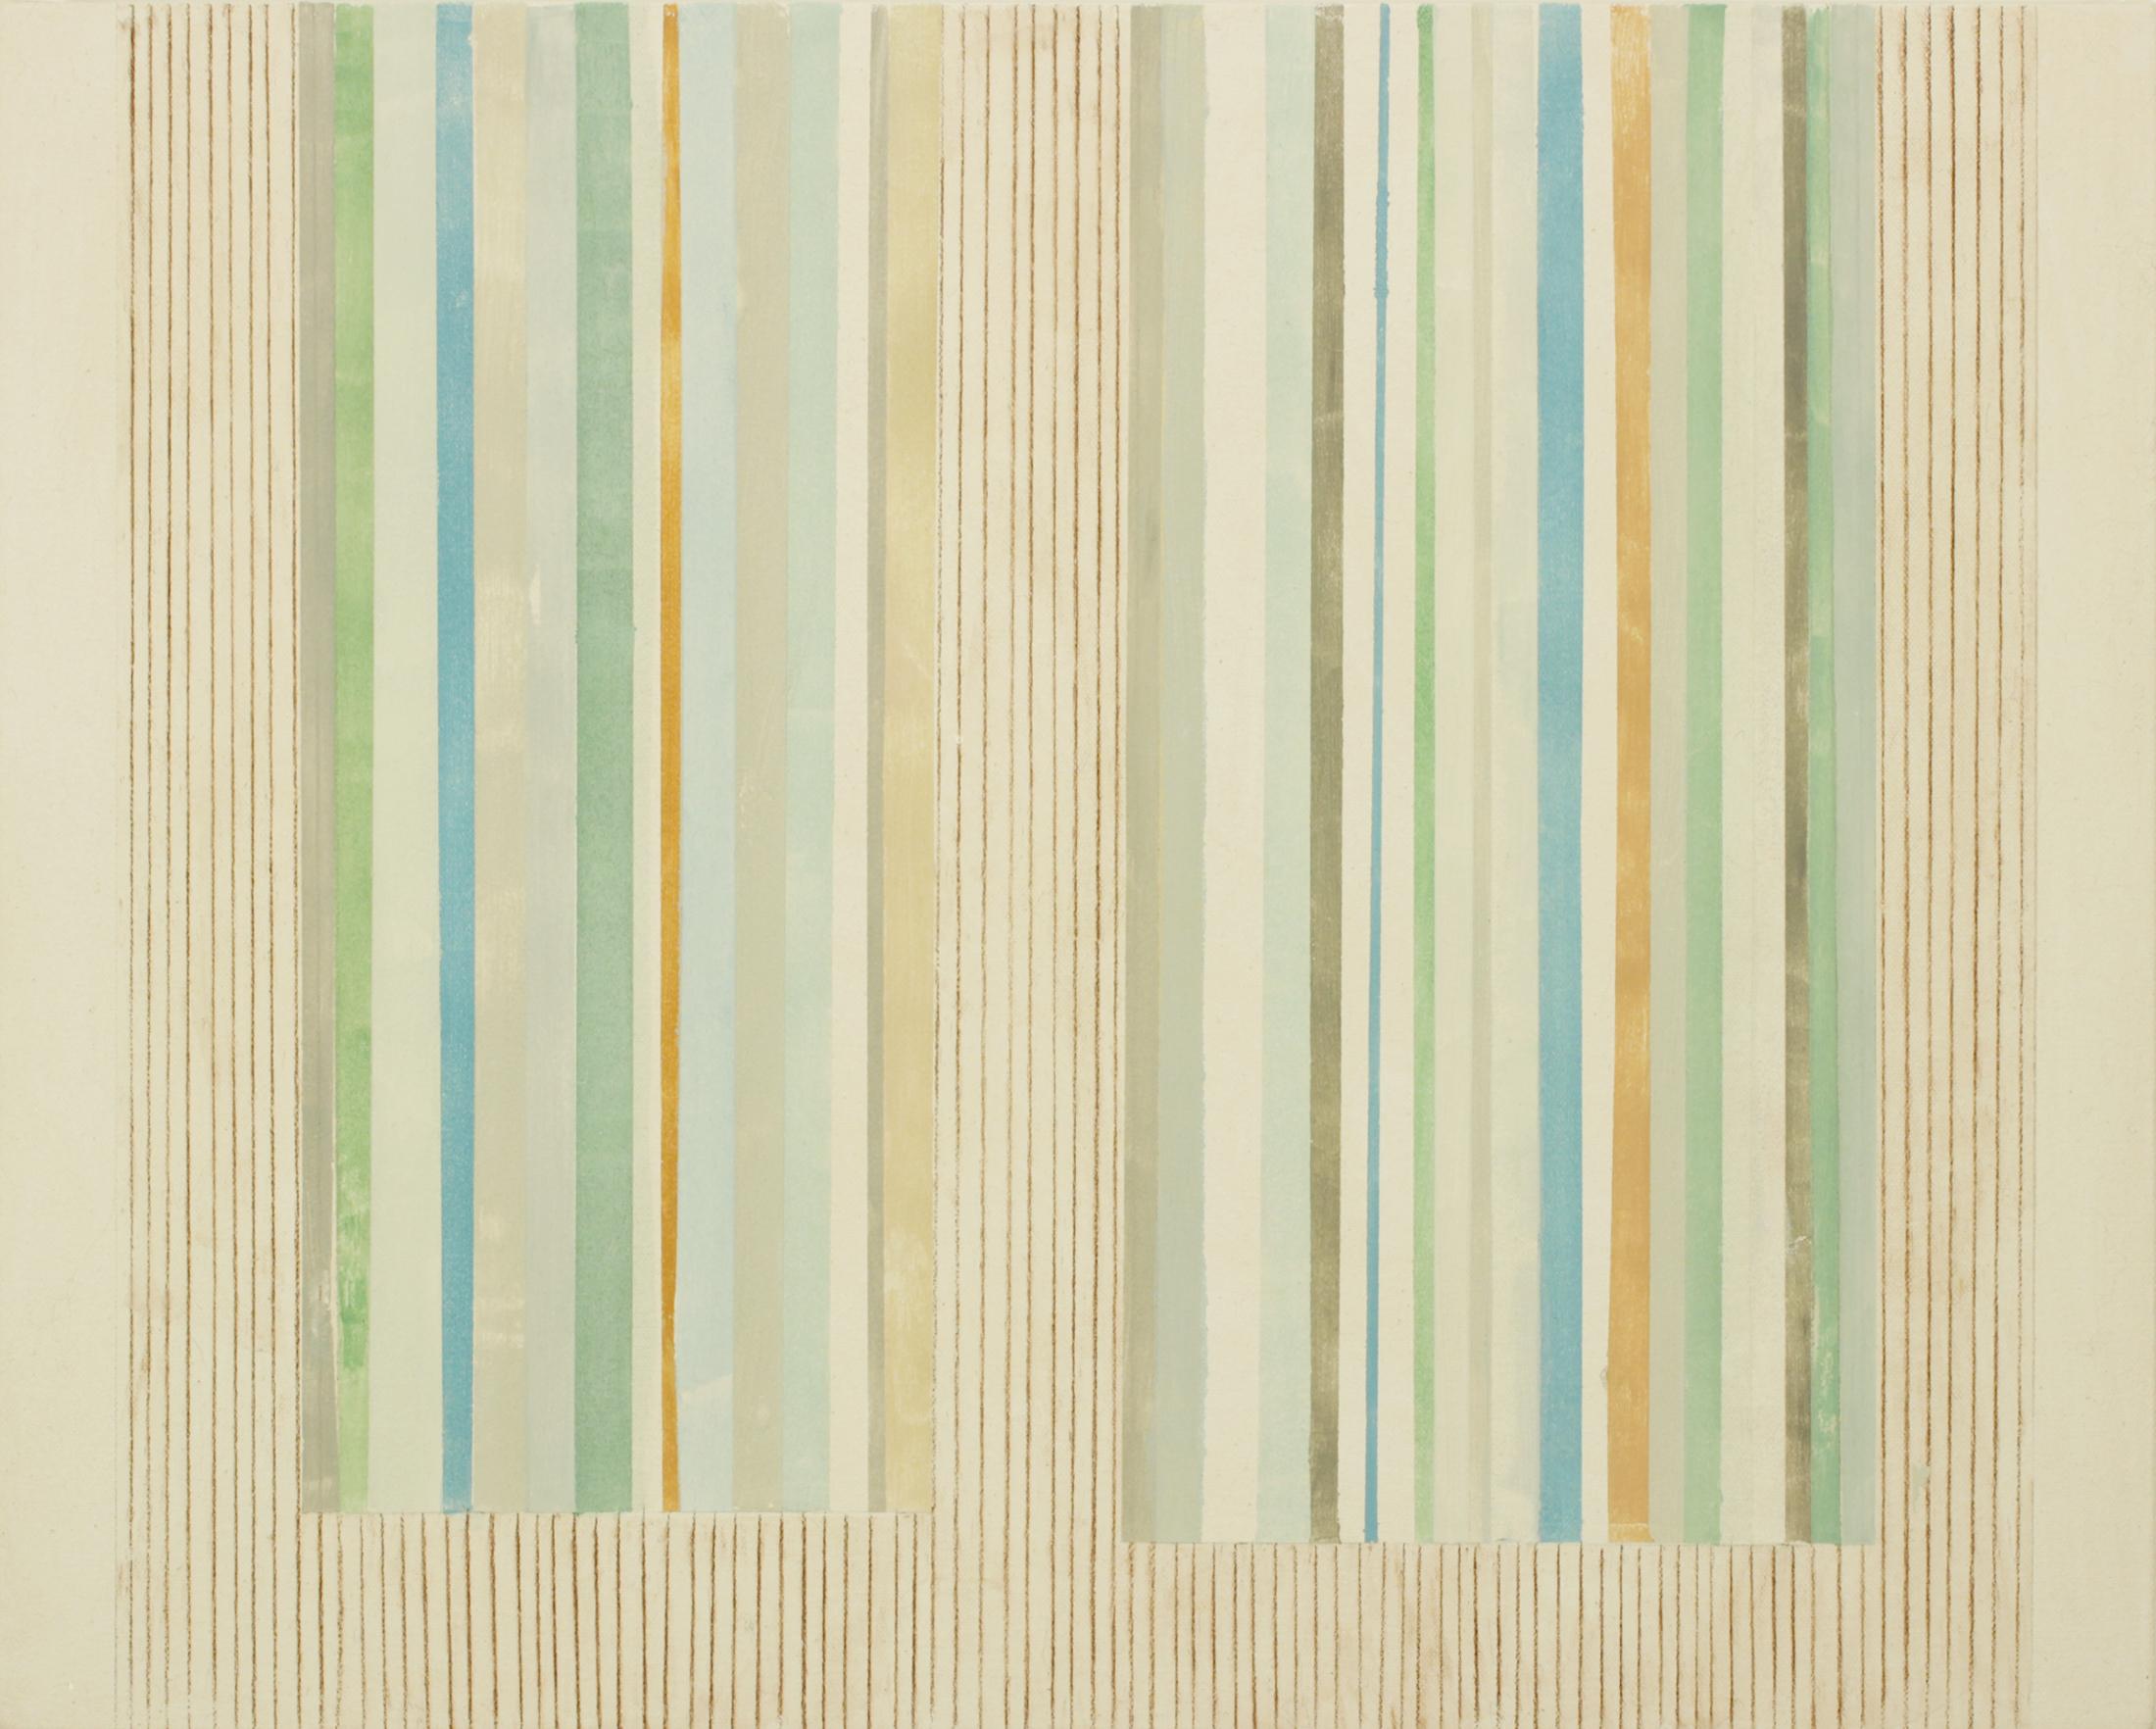 Clean and precise, carefully ordered thin stripes and thicker blocks of color in gray, dark yellow ochre, shades of olive green, blue and brown are lively and vibrant against the soft beige background. Signed, dated and titled on verso.

Elizabeth